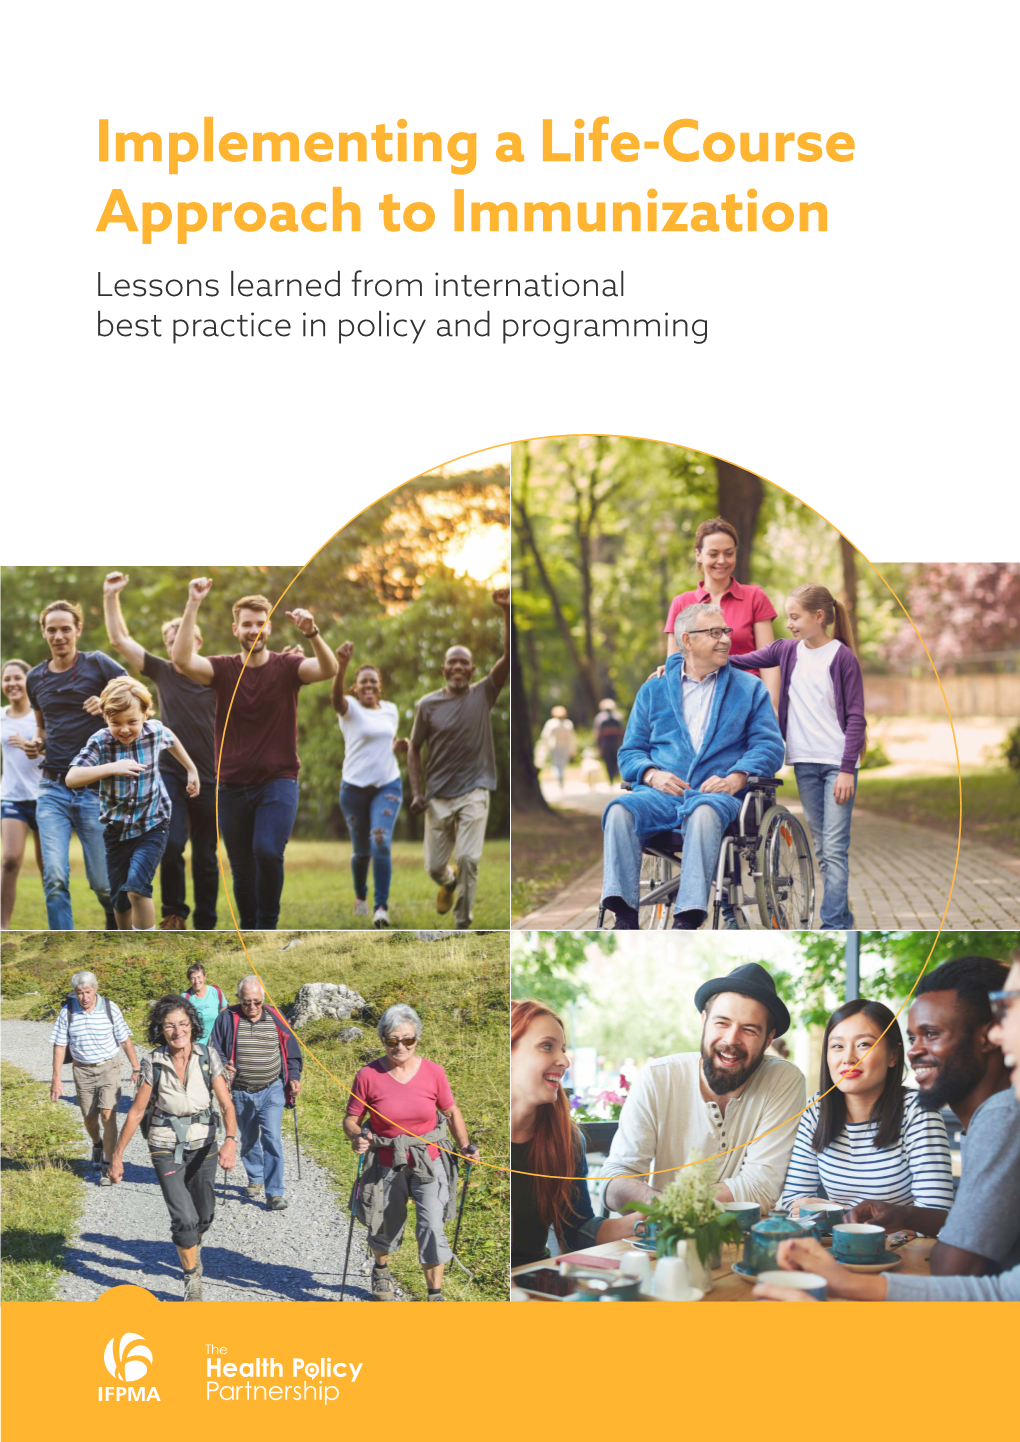 Implementing a Life-Course Approach to Immunization Lessons Learned from International Best Practice in Policy and Programming Contents